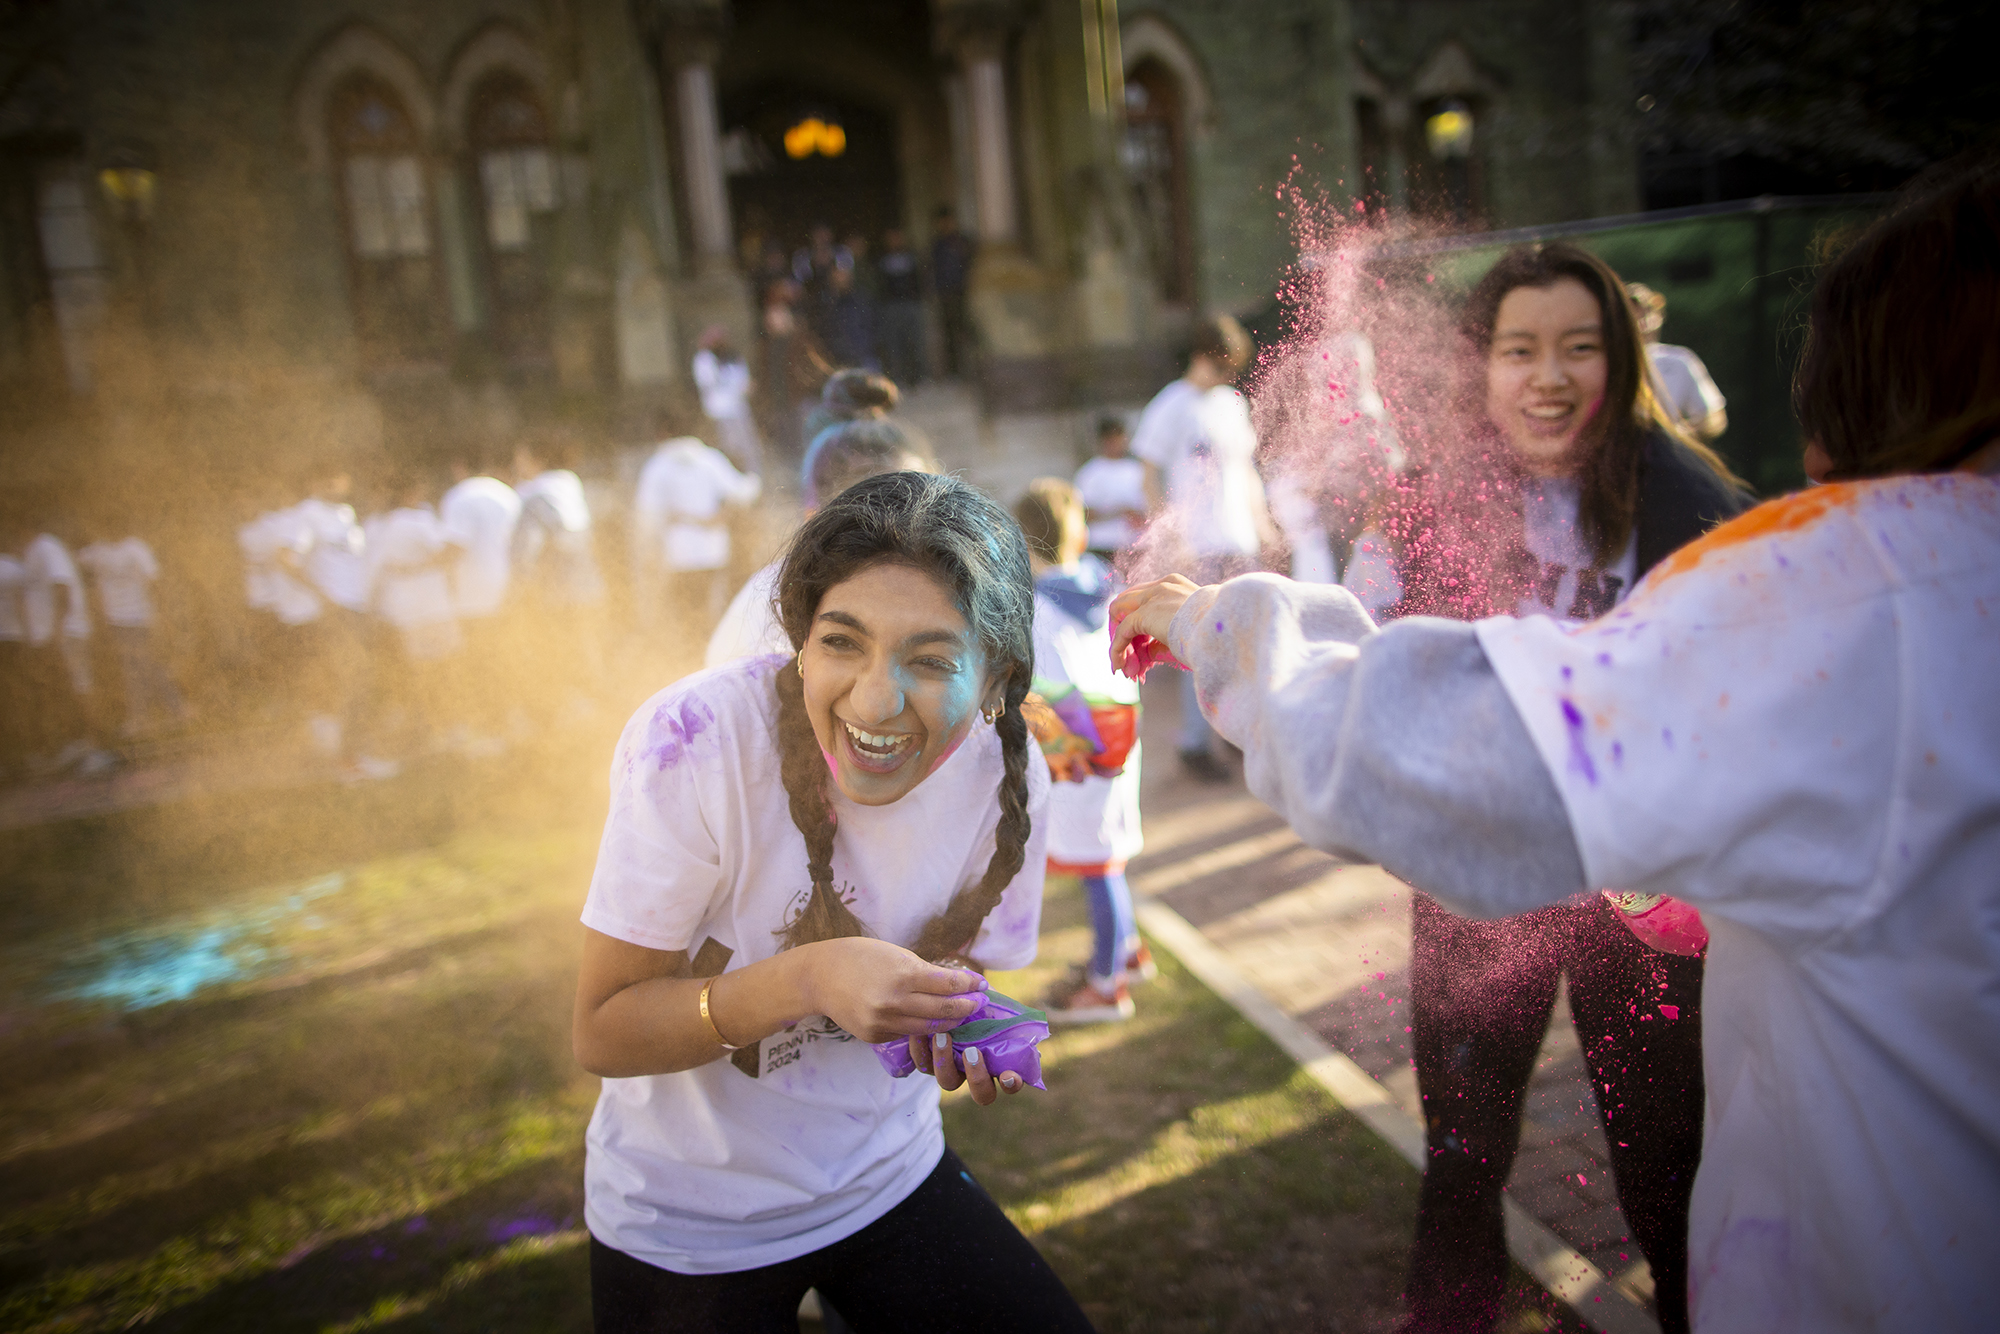 A Penn student laughs as powder is thrown on College Green during Penn’s Holi celebration.